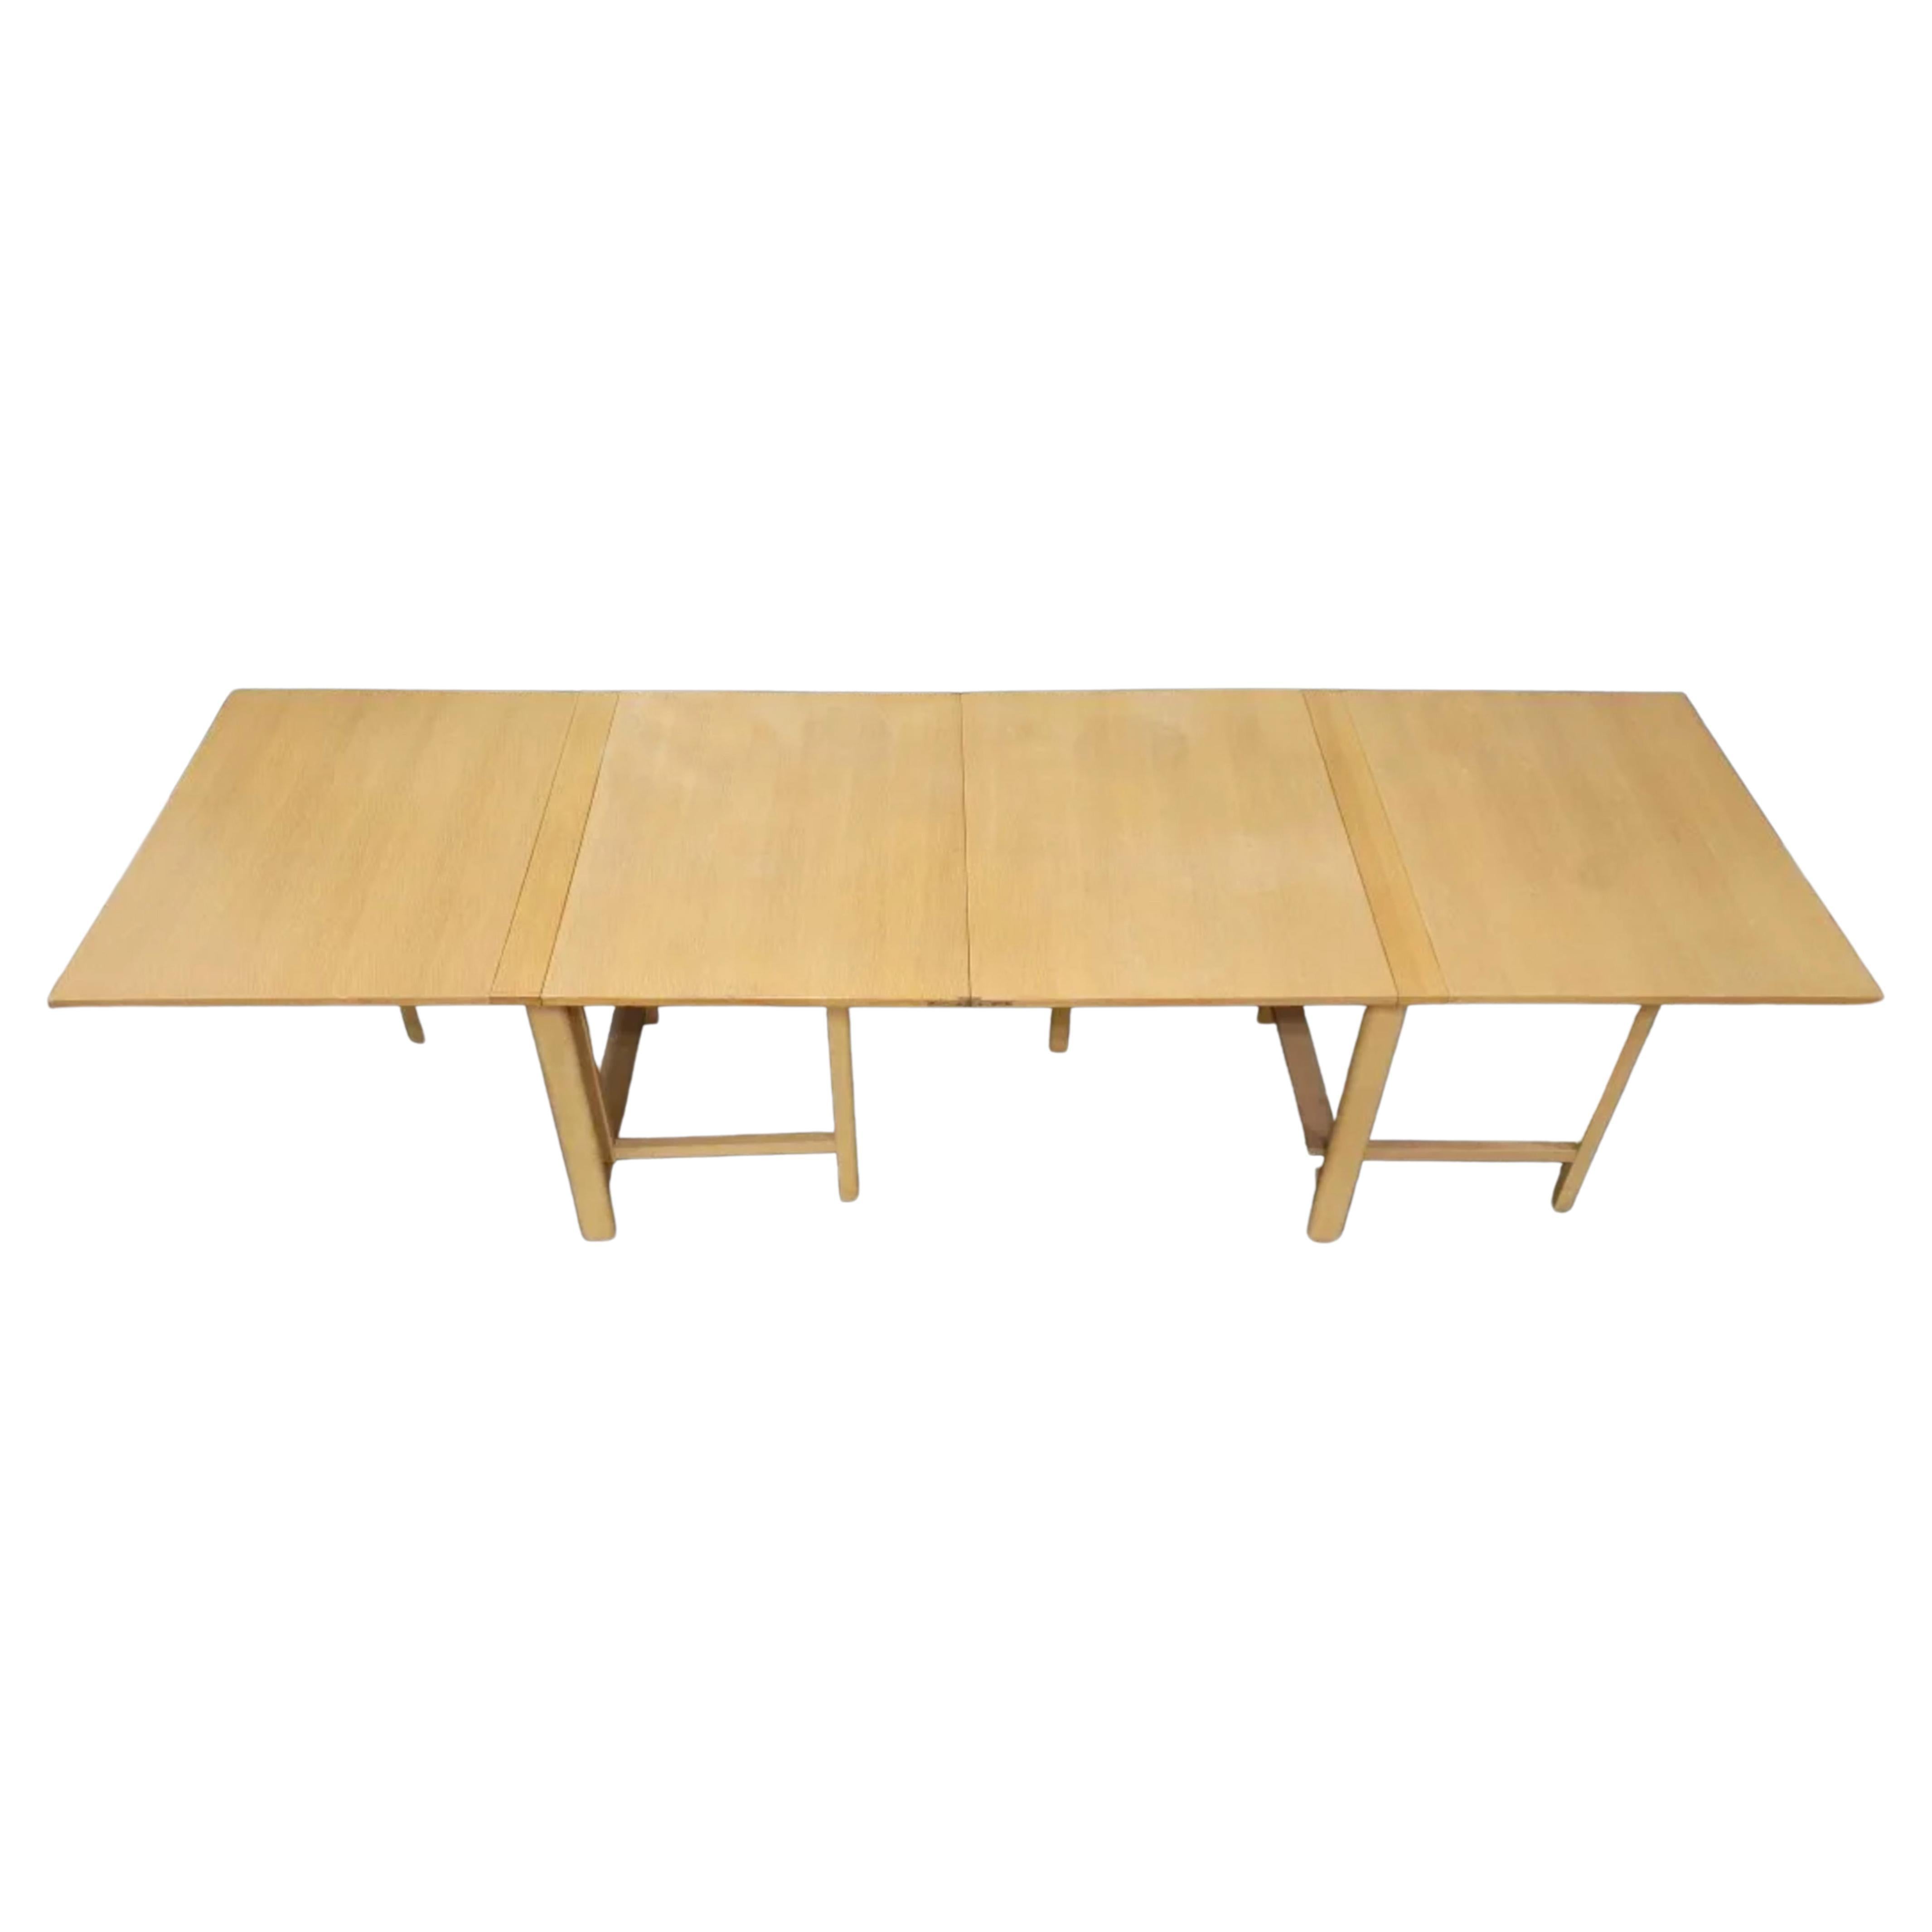 Mid-Century Modern Maria folding extension dining table by Bruno Mathsson. Table is beech wood blonde finish with brass hardware. Good vintage condition. Table folds down very small to stow away while not using. Made in Swedish. Located in Brooklyn